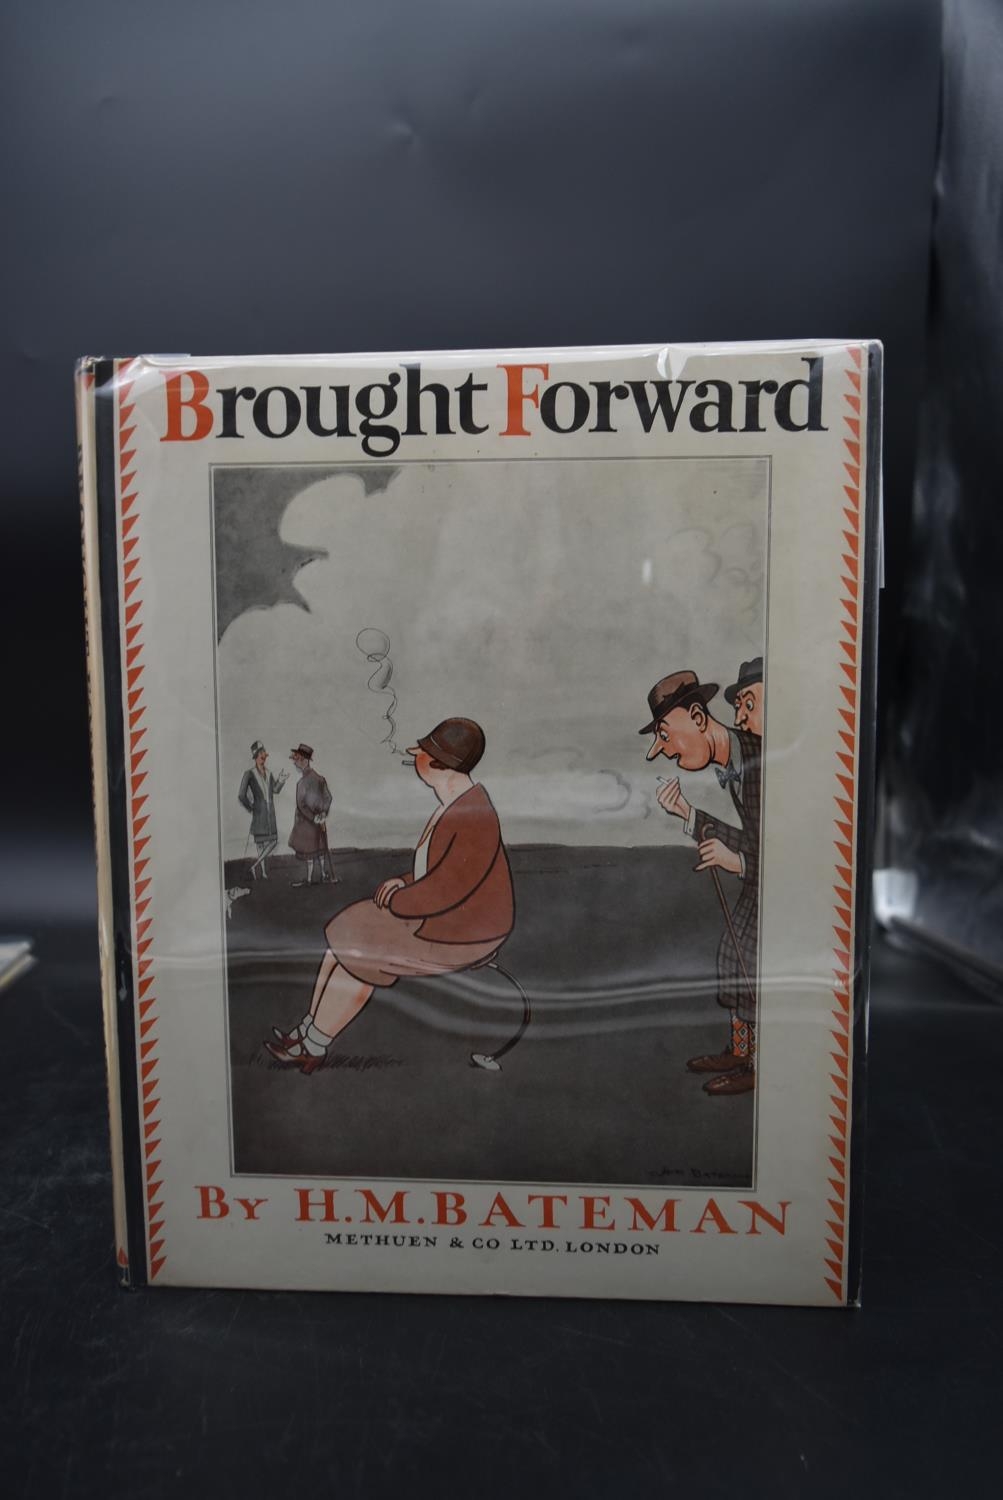 Two first edition books: Brought Forward by H. M. Bateman and For the Leg of a Chicken by Bettina - Image 6 of 9